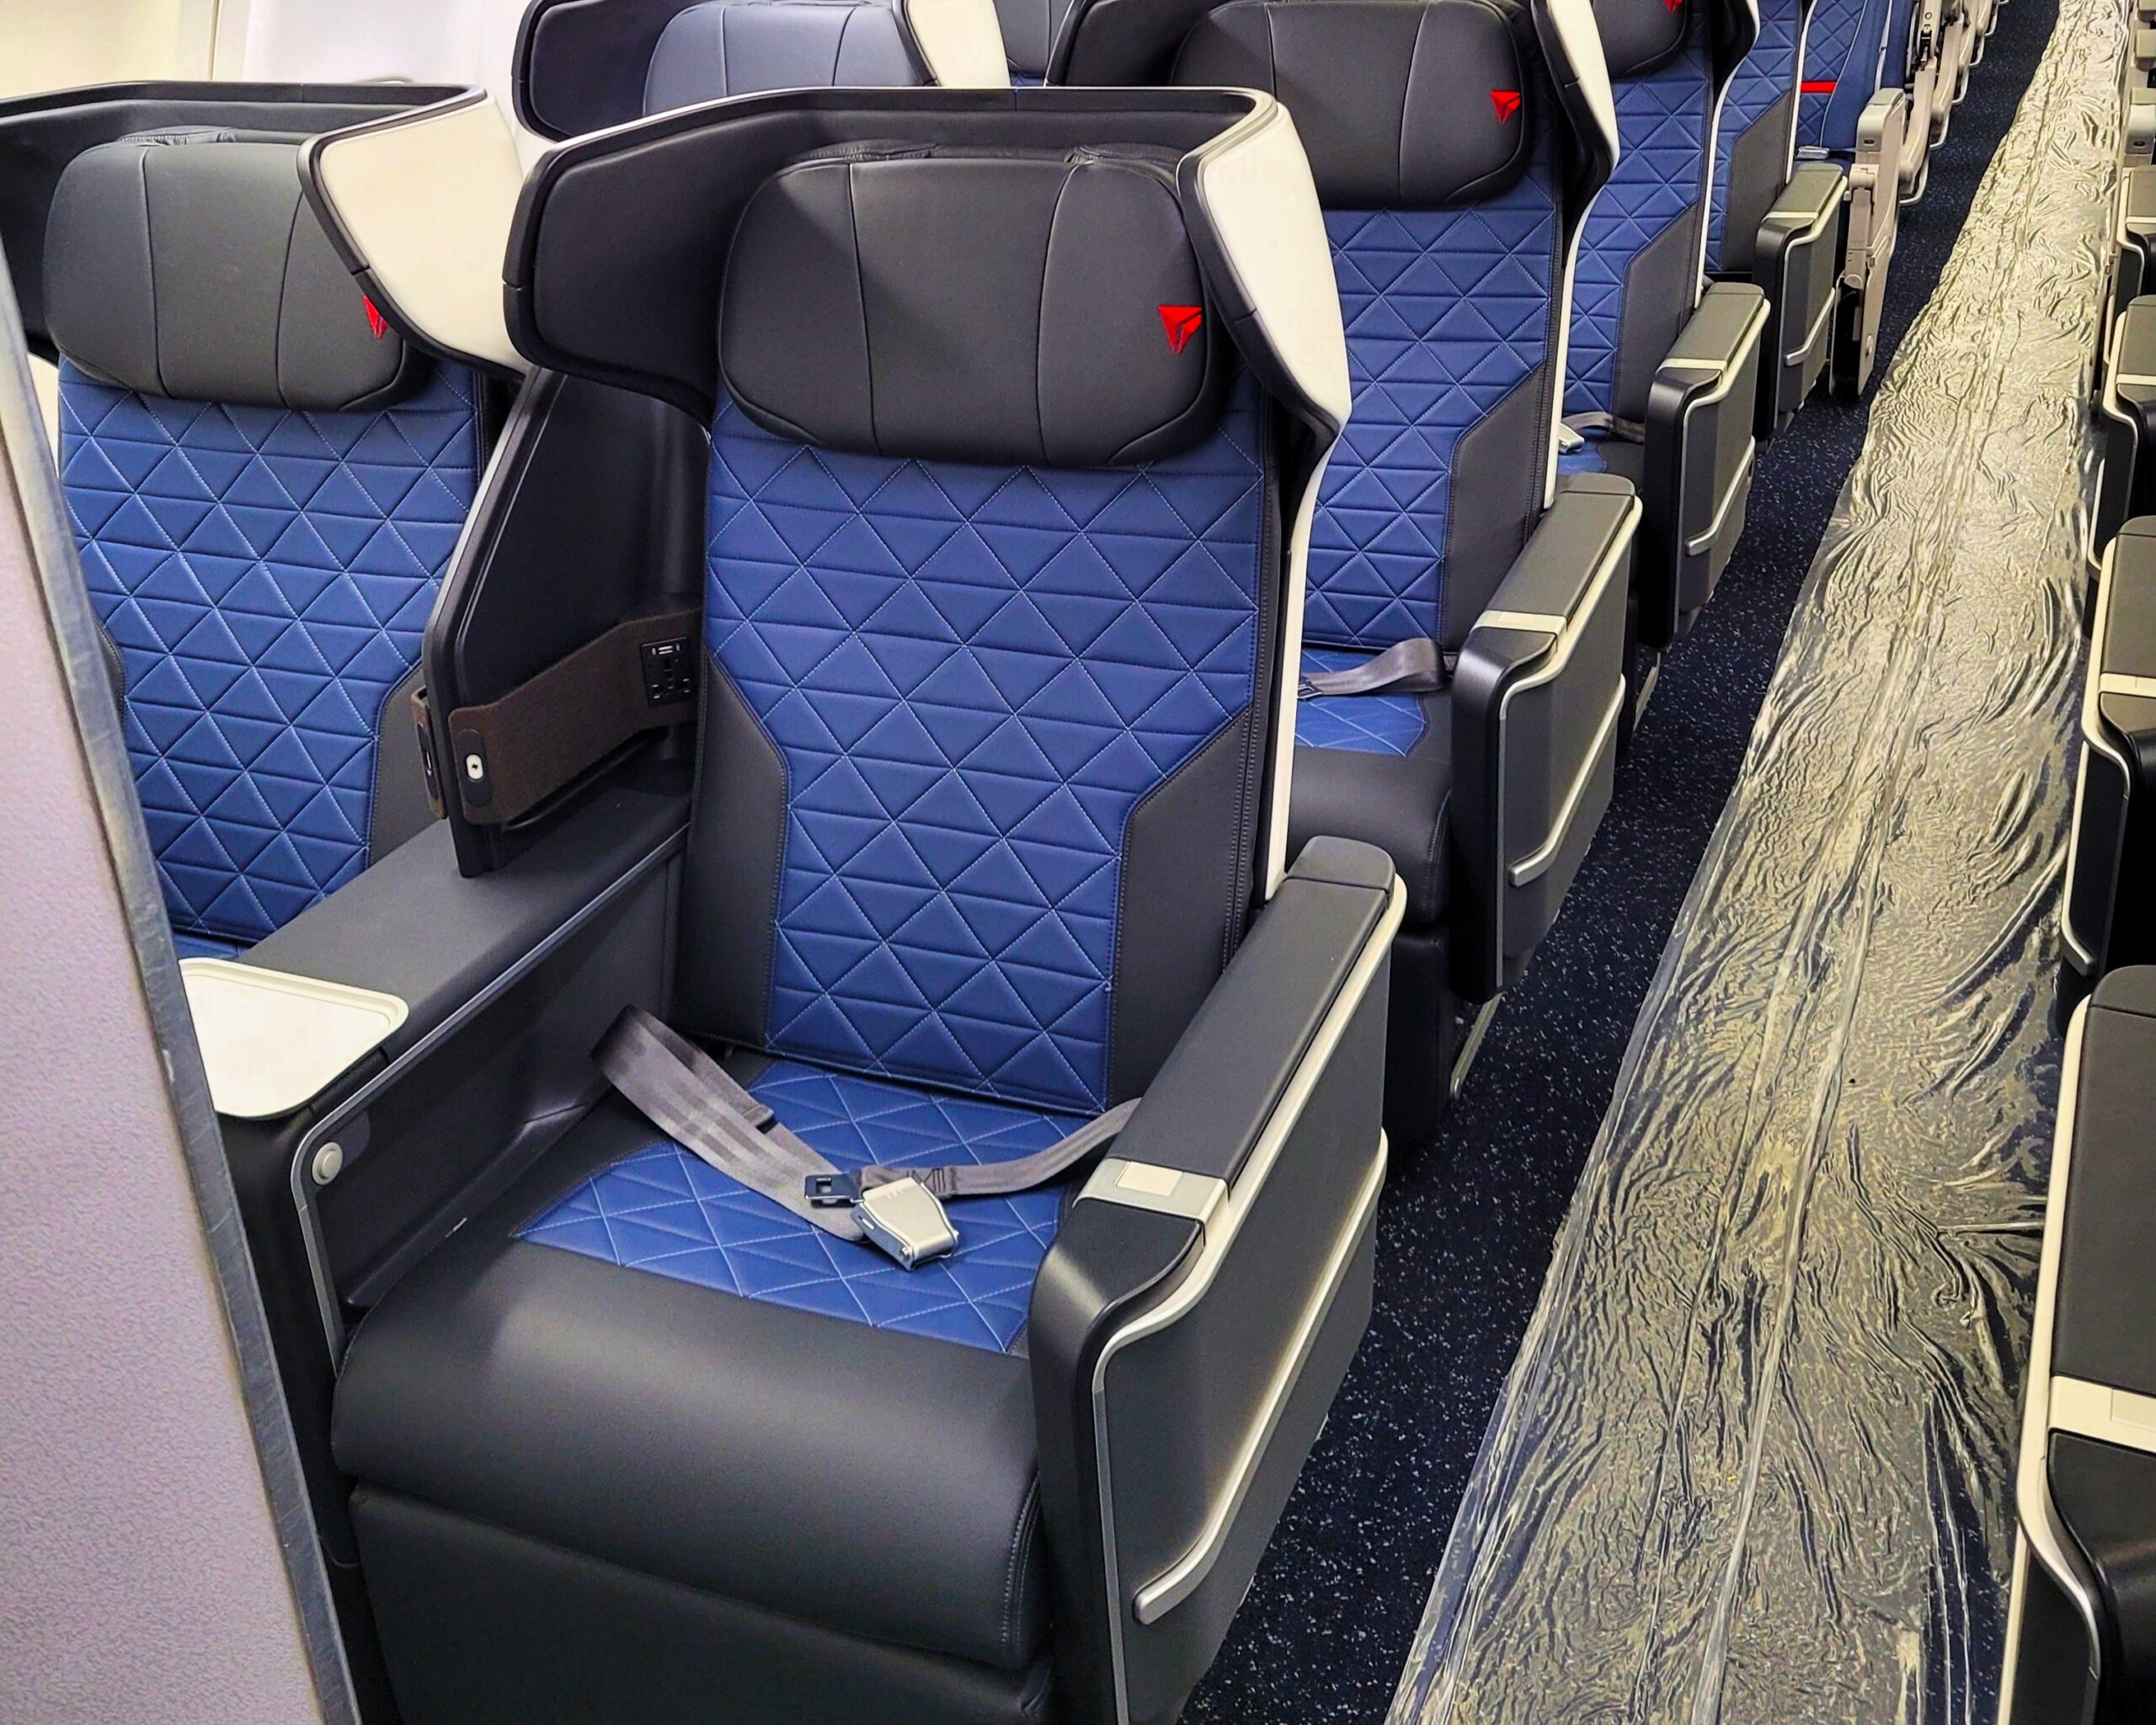 Delta's Boeing 737-800s Get Premium Cabin Makeover, New First Class Seats